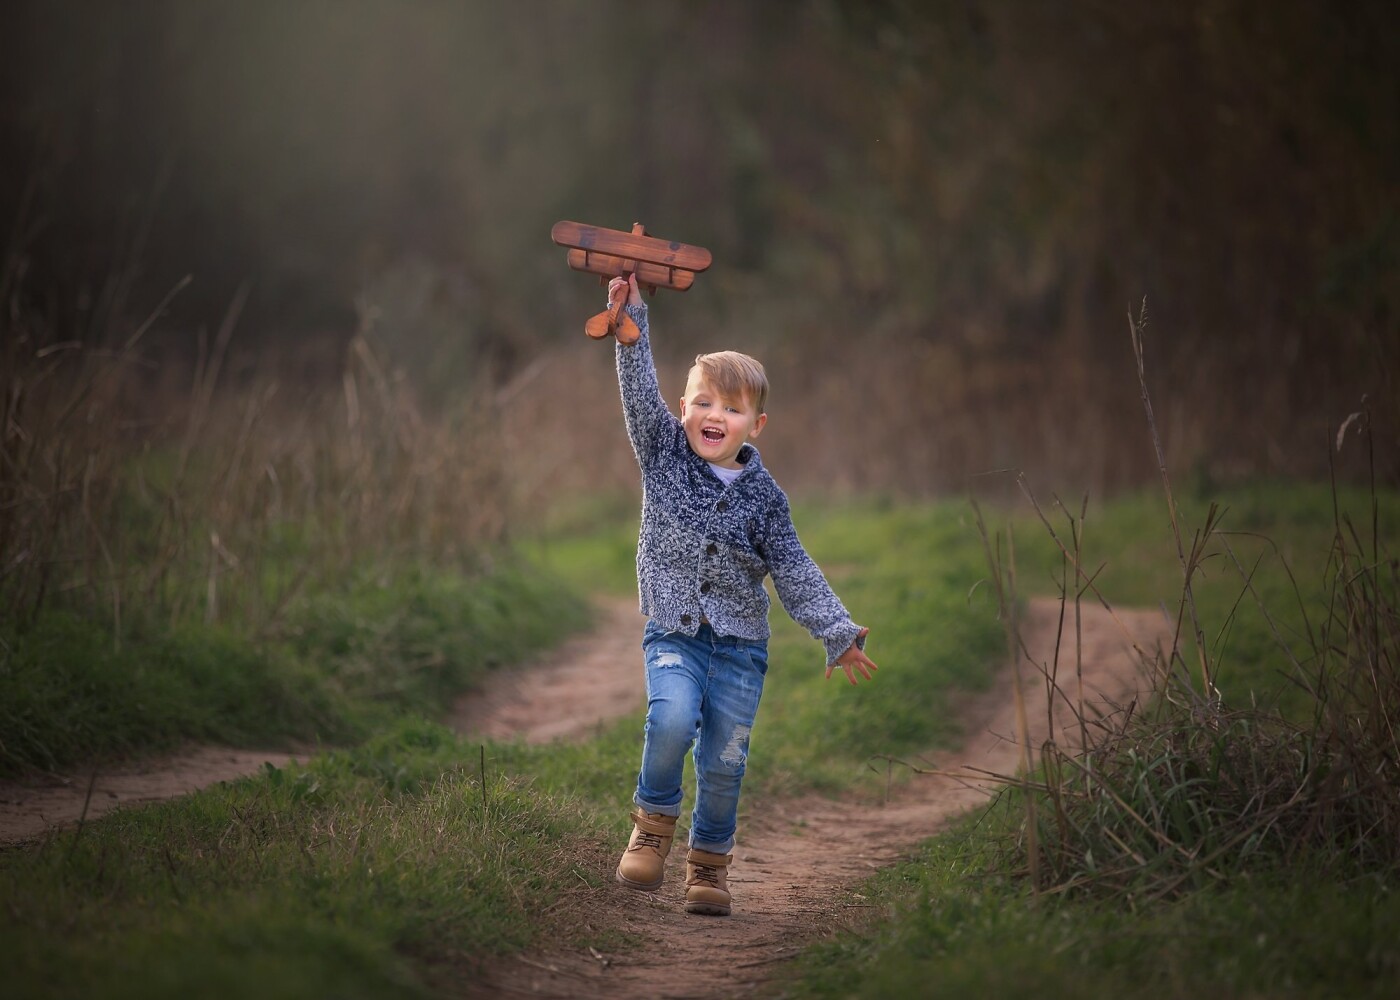 This image was taken during a family portrait session. The little boy was getting a bit bored, so I encouraged him to have some play time and fly a little wooden plane around. I love the expression on his face capturing childhood and playing outdoors.